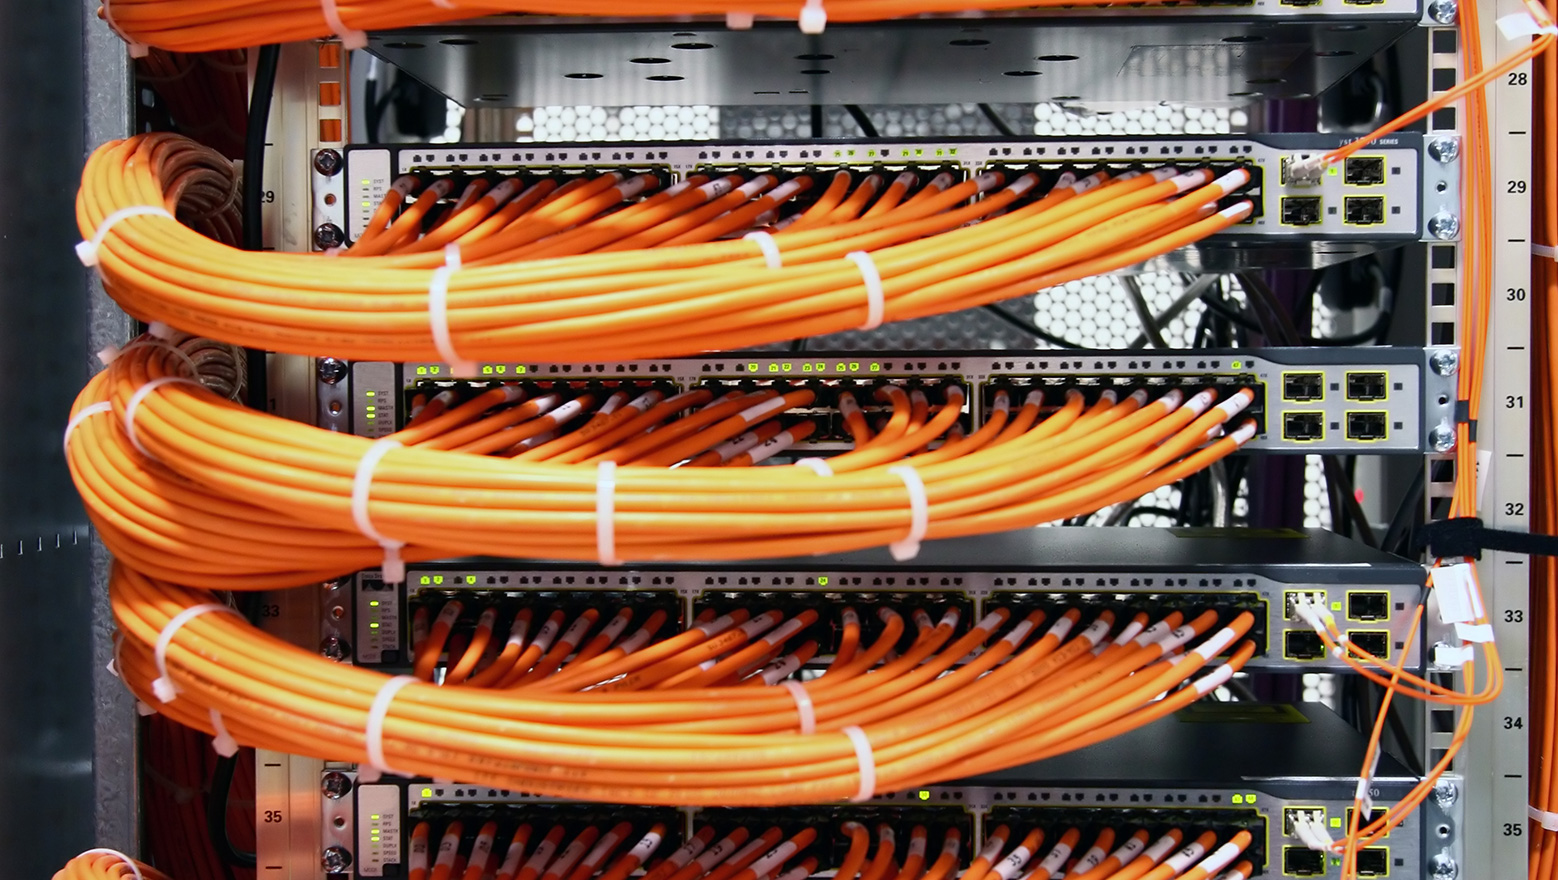 OAX Communications Cabling Networking